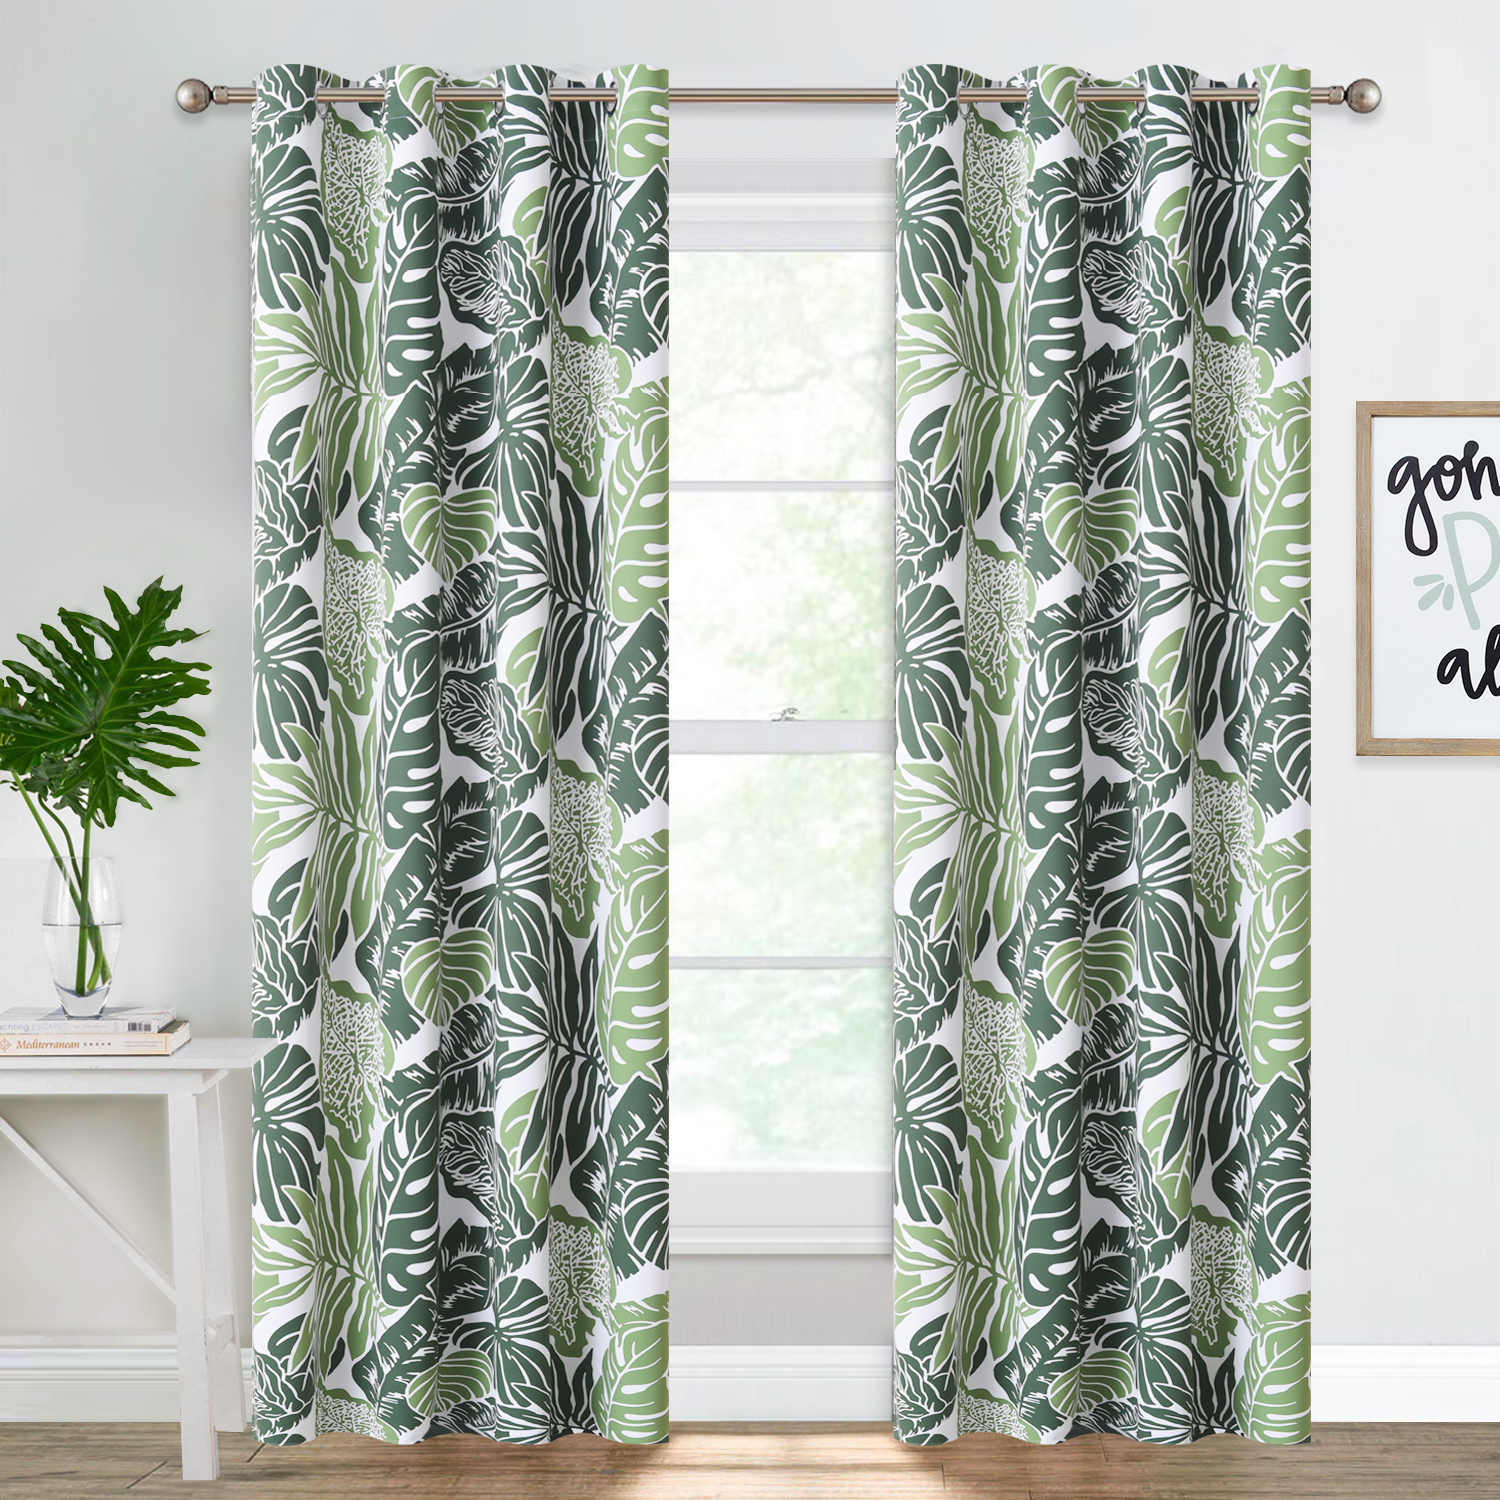 Banana Leaf Blackout Curtain, Sold As 1 Panel